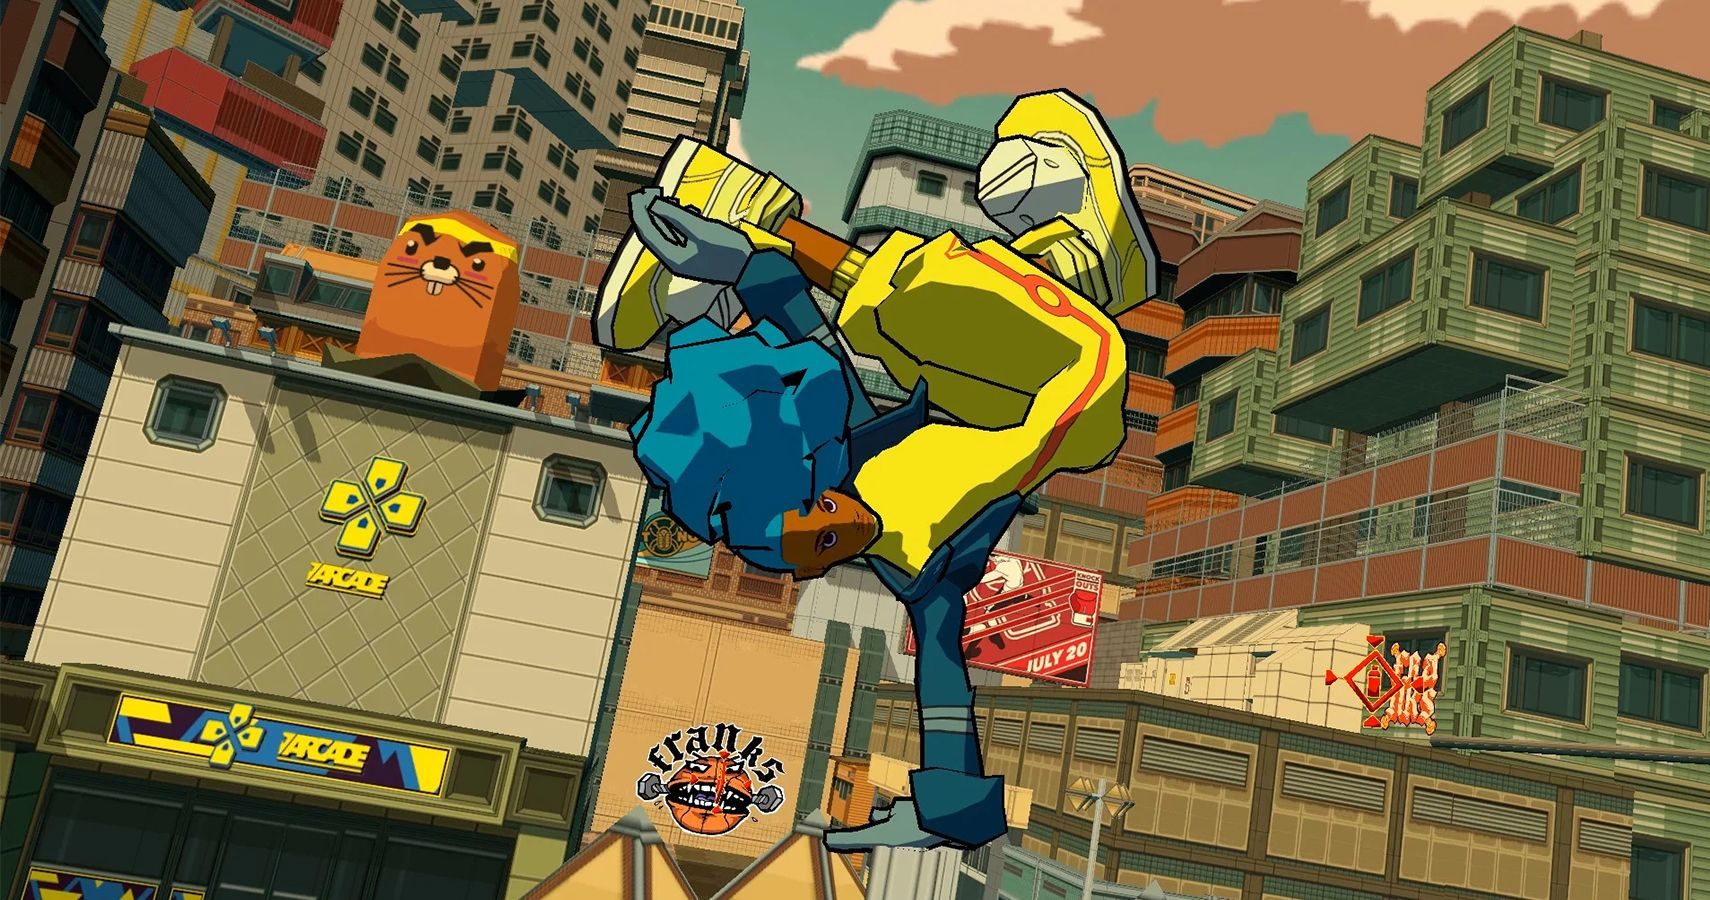 bomb-rush-cyberfunk-promo-image-of-person-in-yellow-jumpsuit-doing-a-handplant-7243194